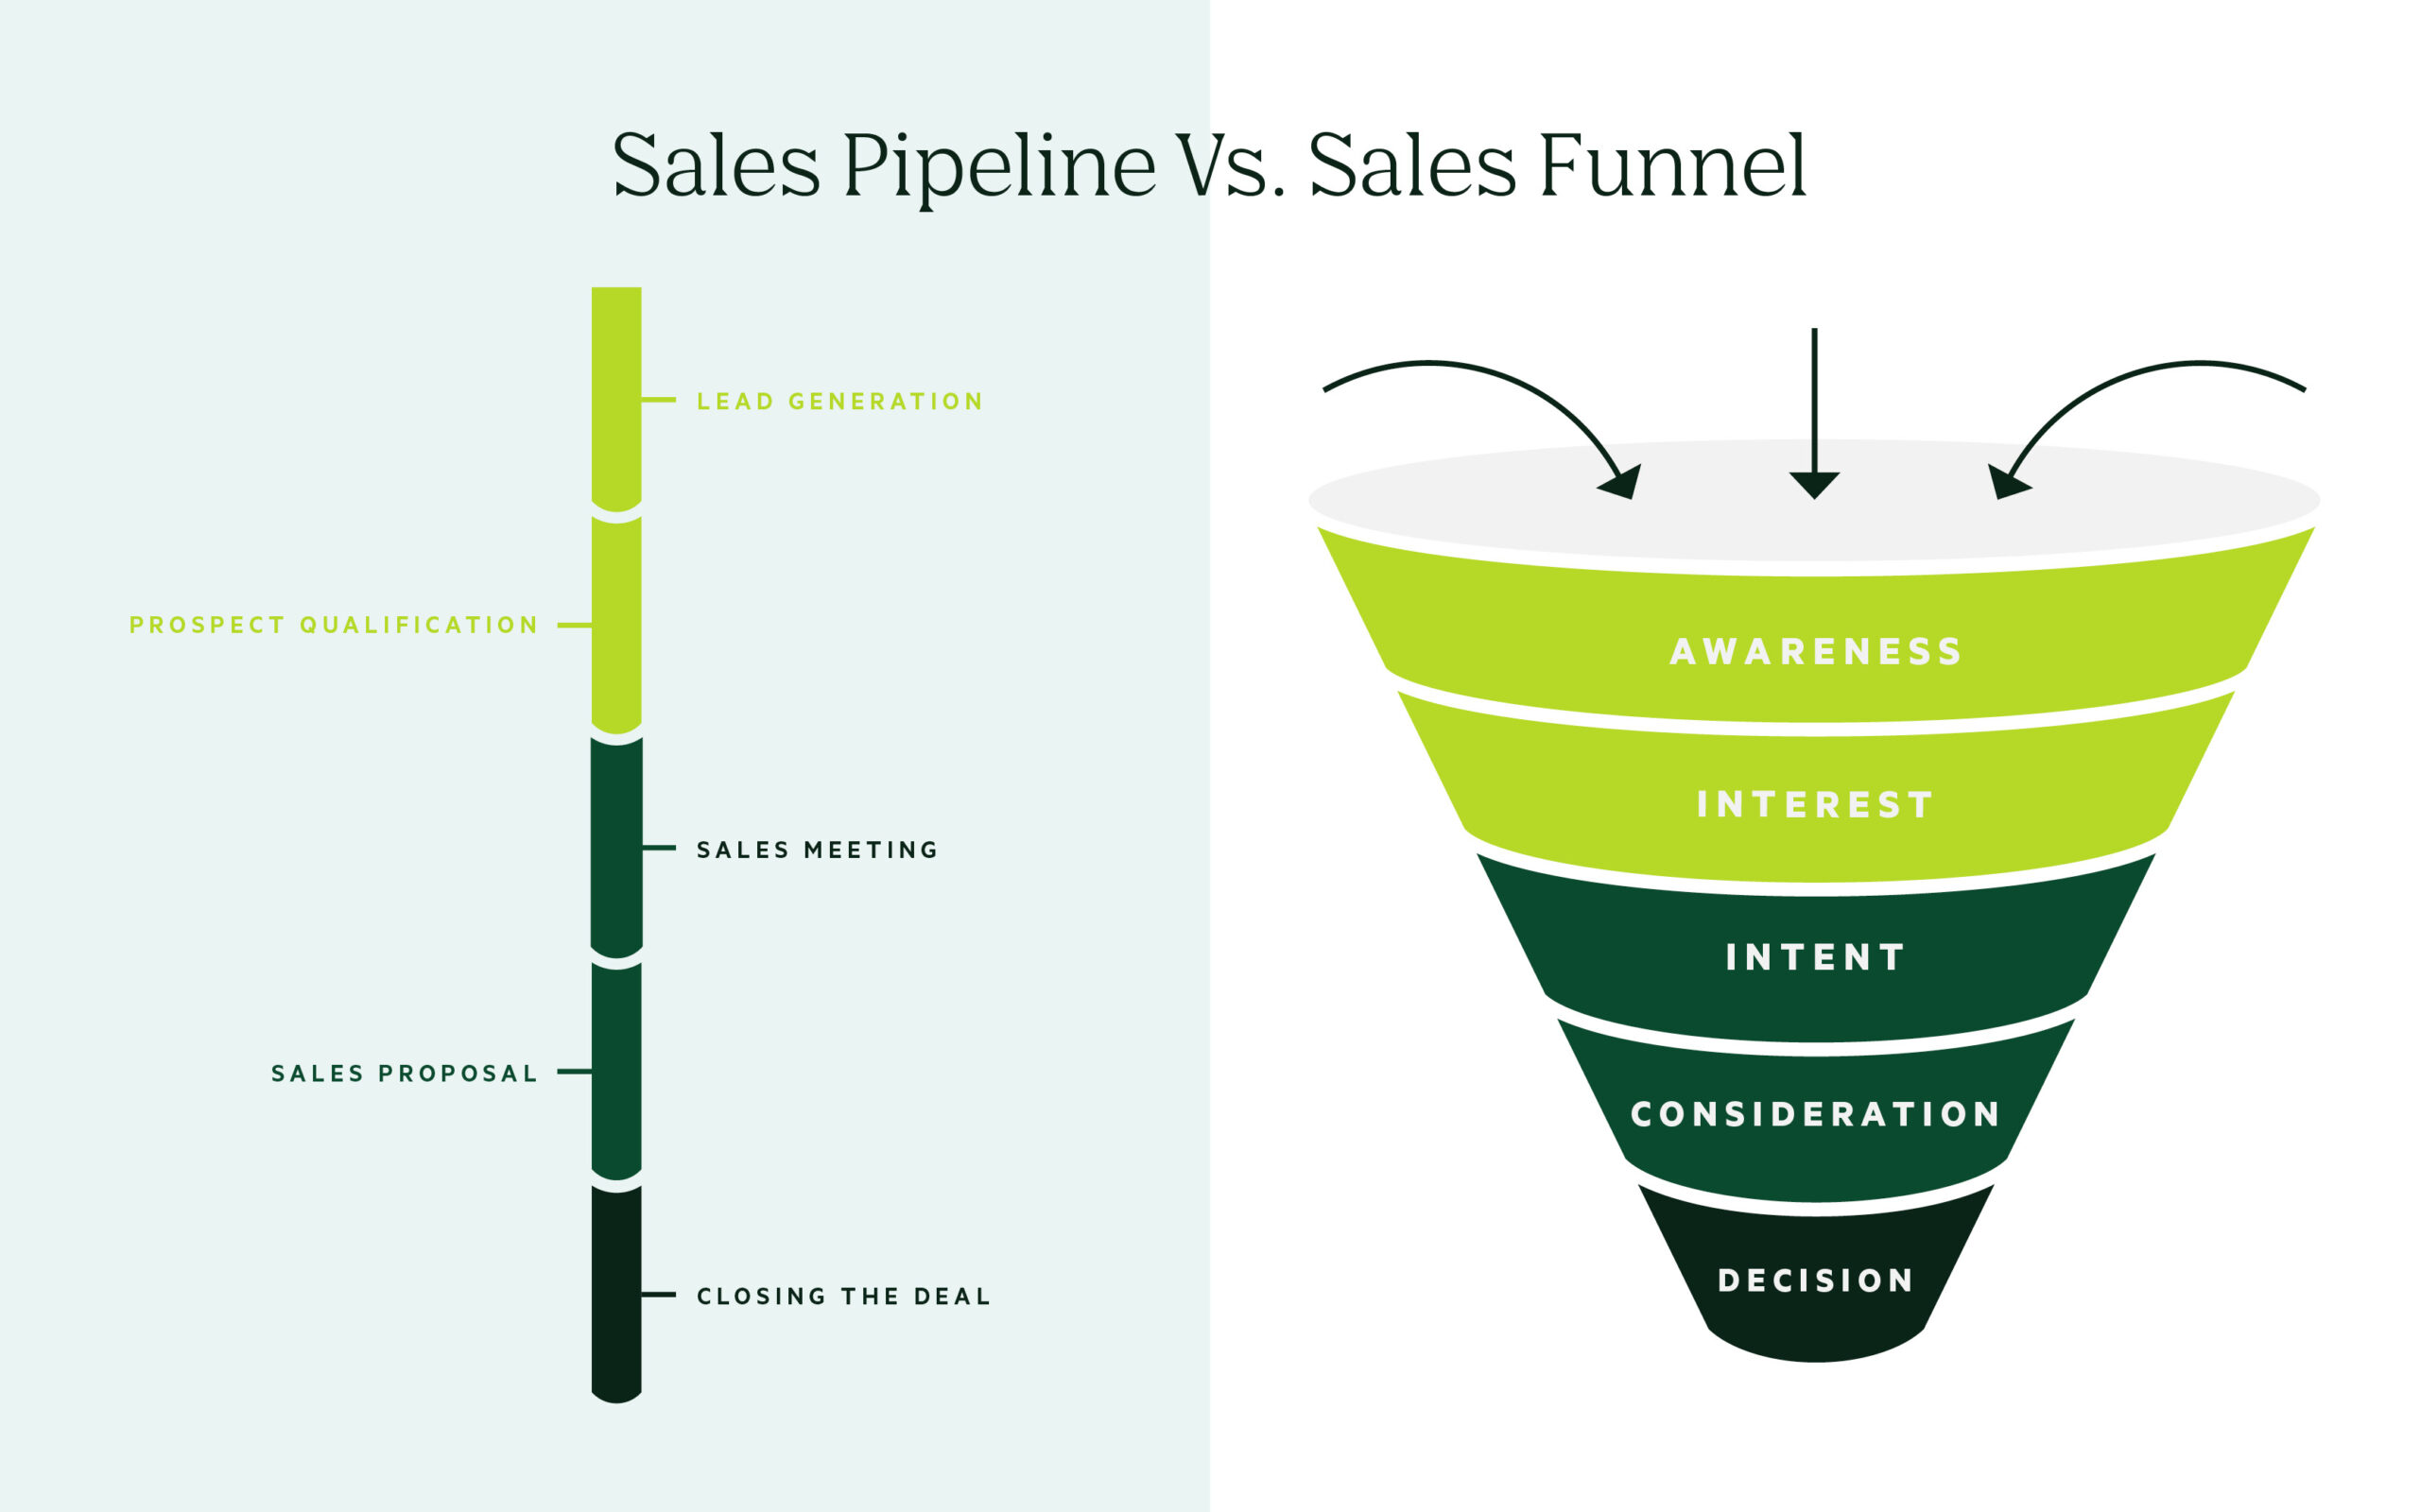 Illustration of the differences between sales pipeline and sales funnel